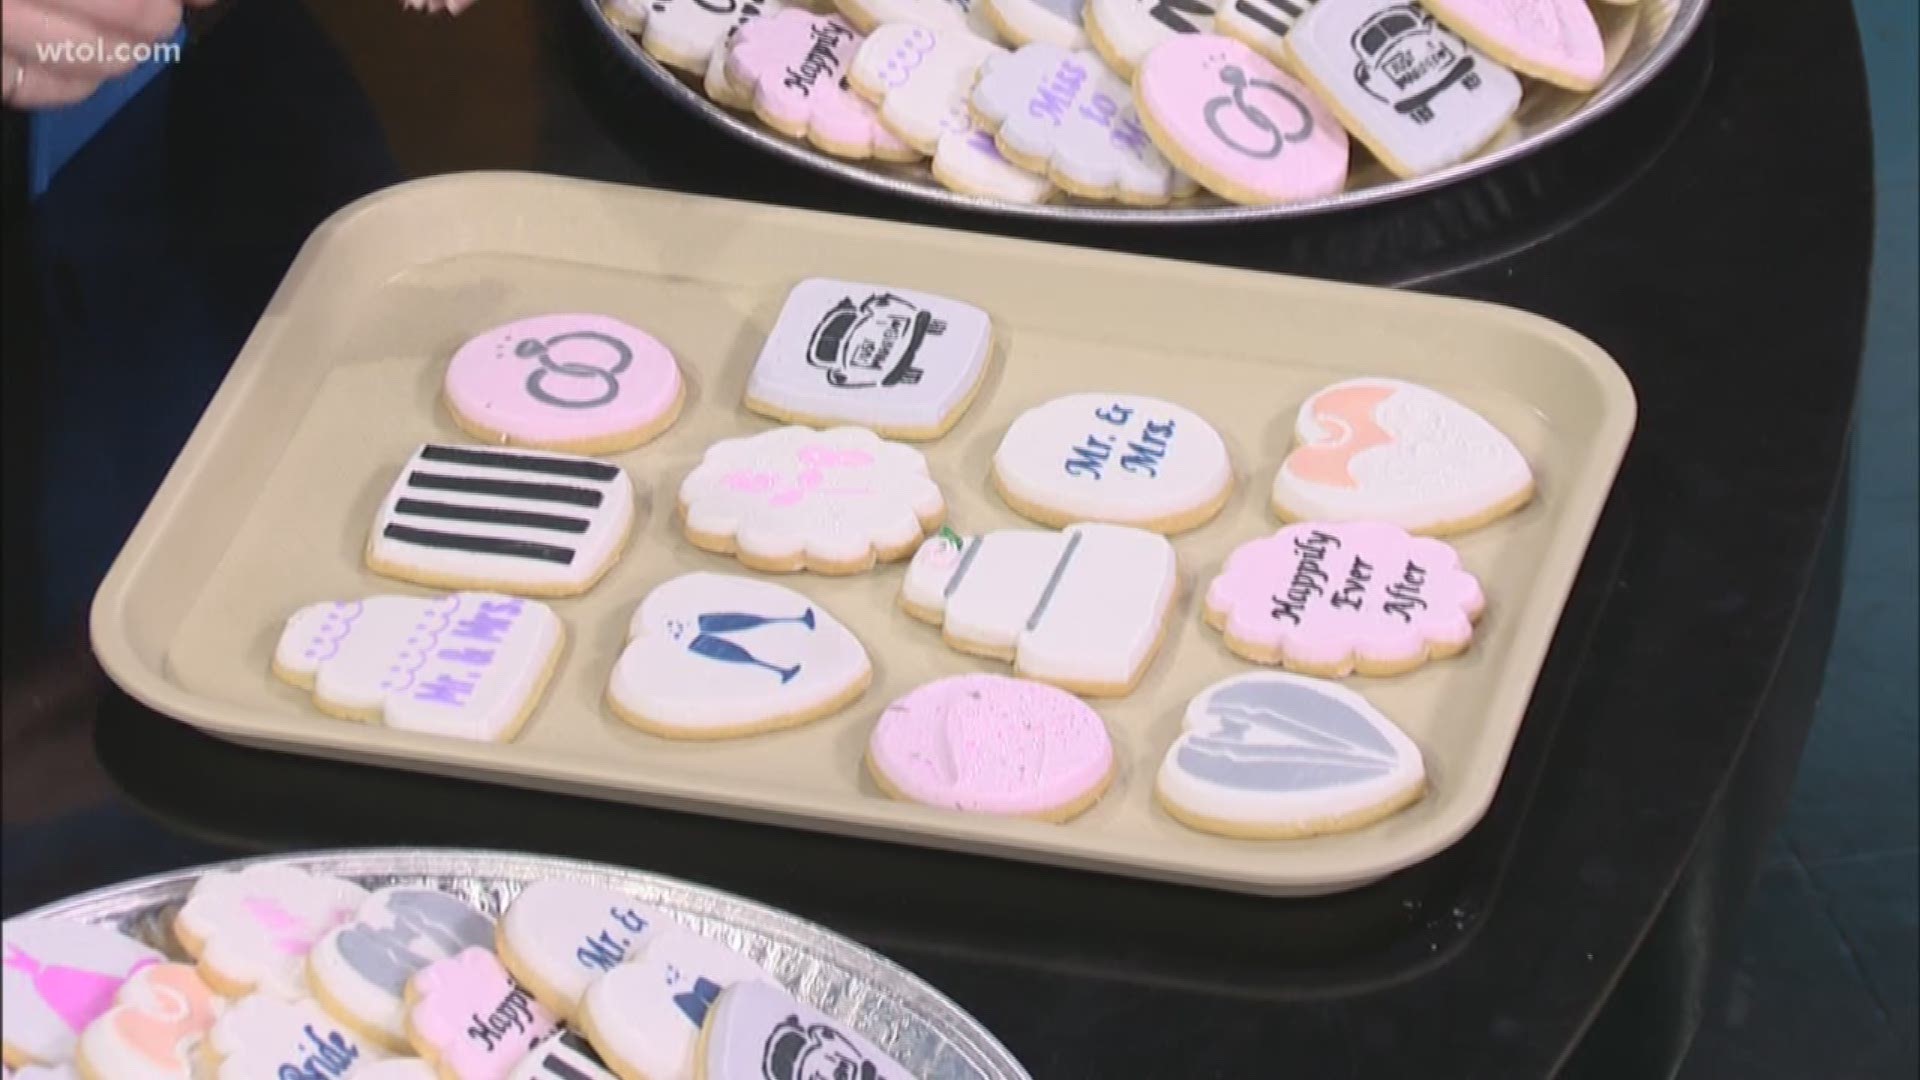 The Cookie Lady shows you how cookies can fit into your wedding plans!